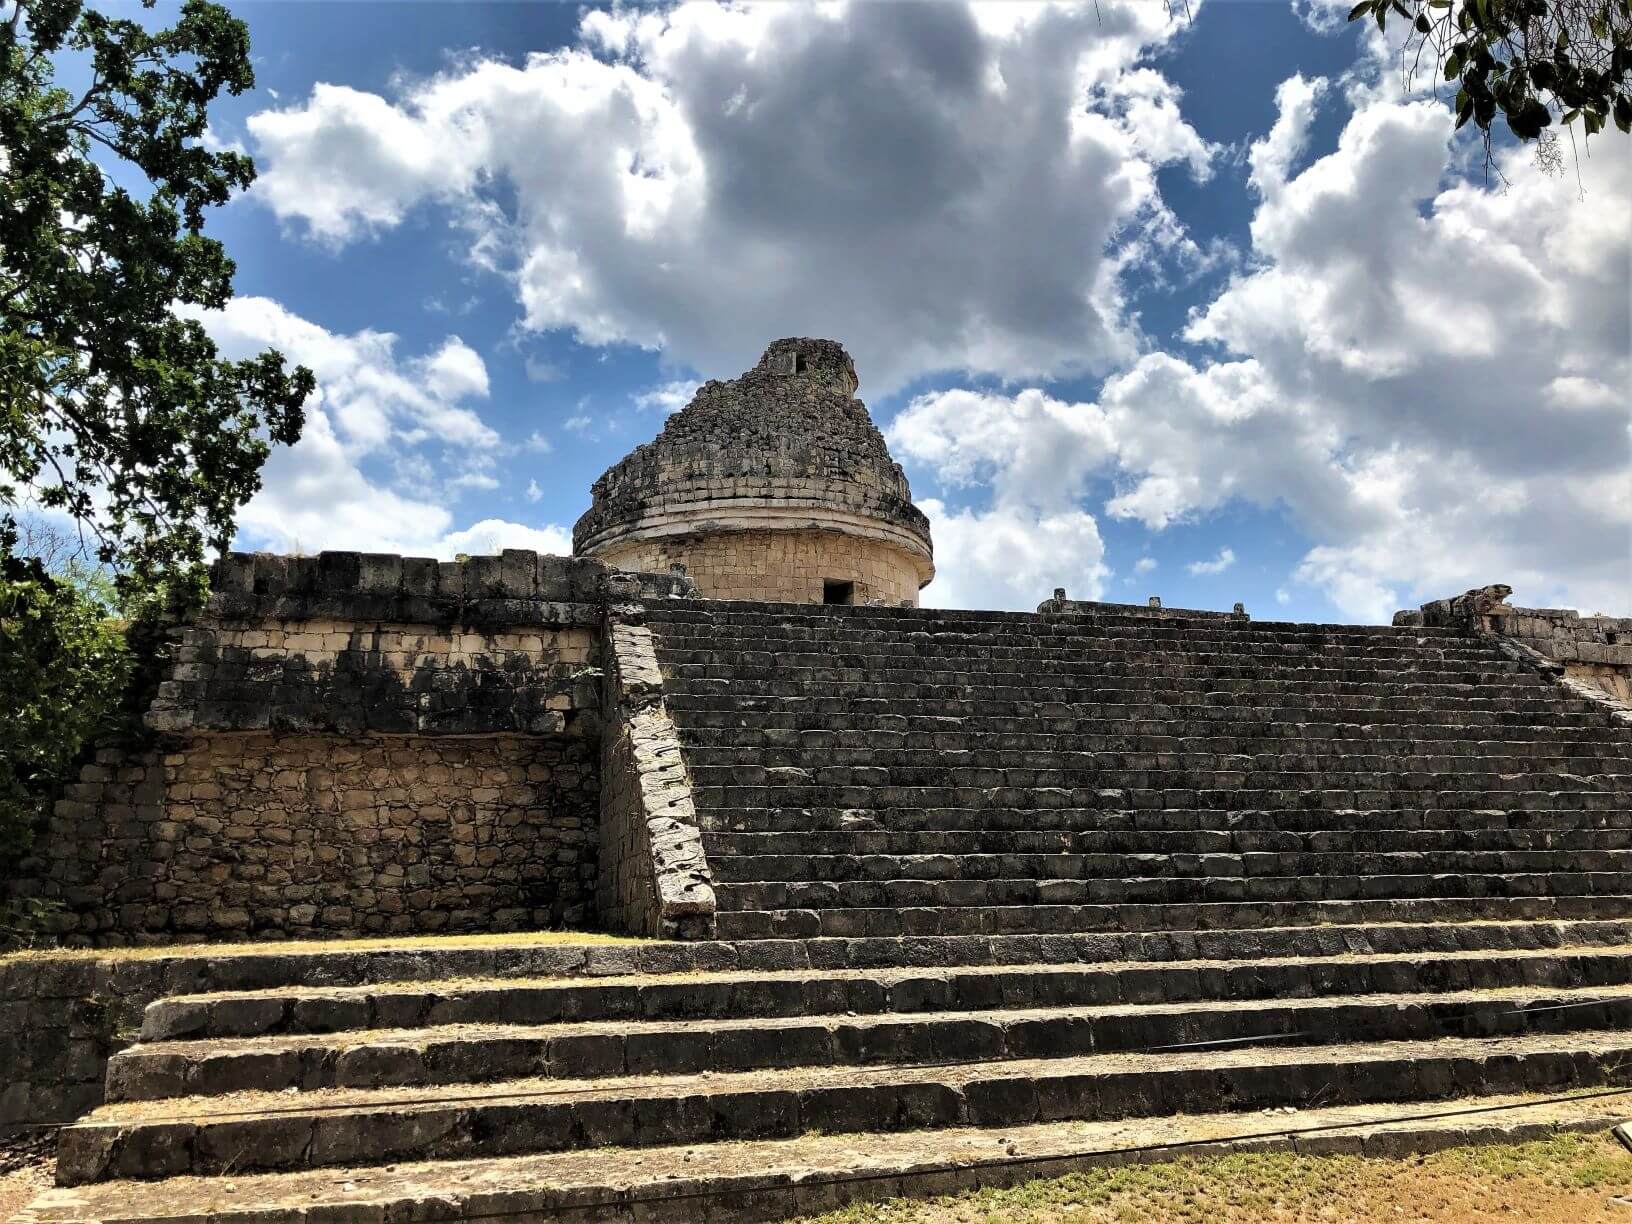 Mayan ruins at Chichen Itza. The observatory with stairs.